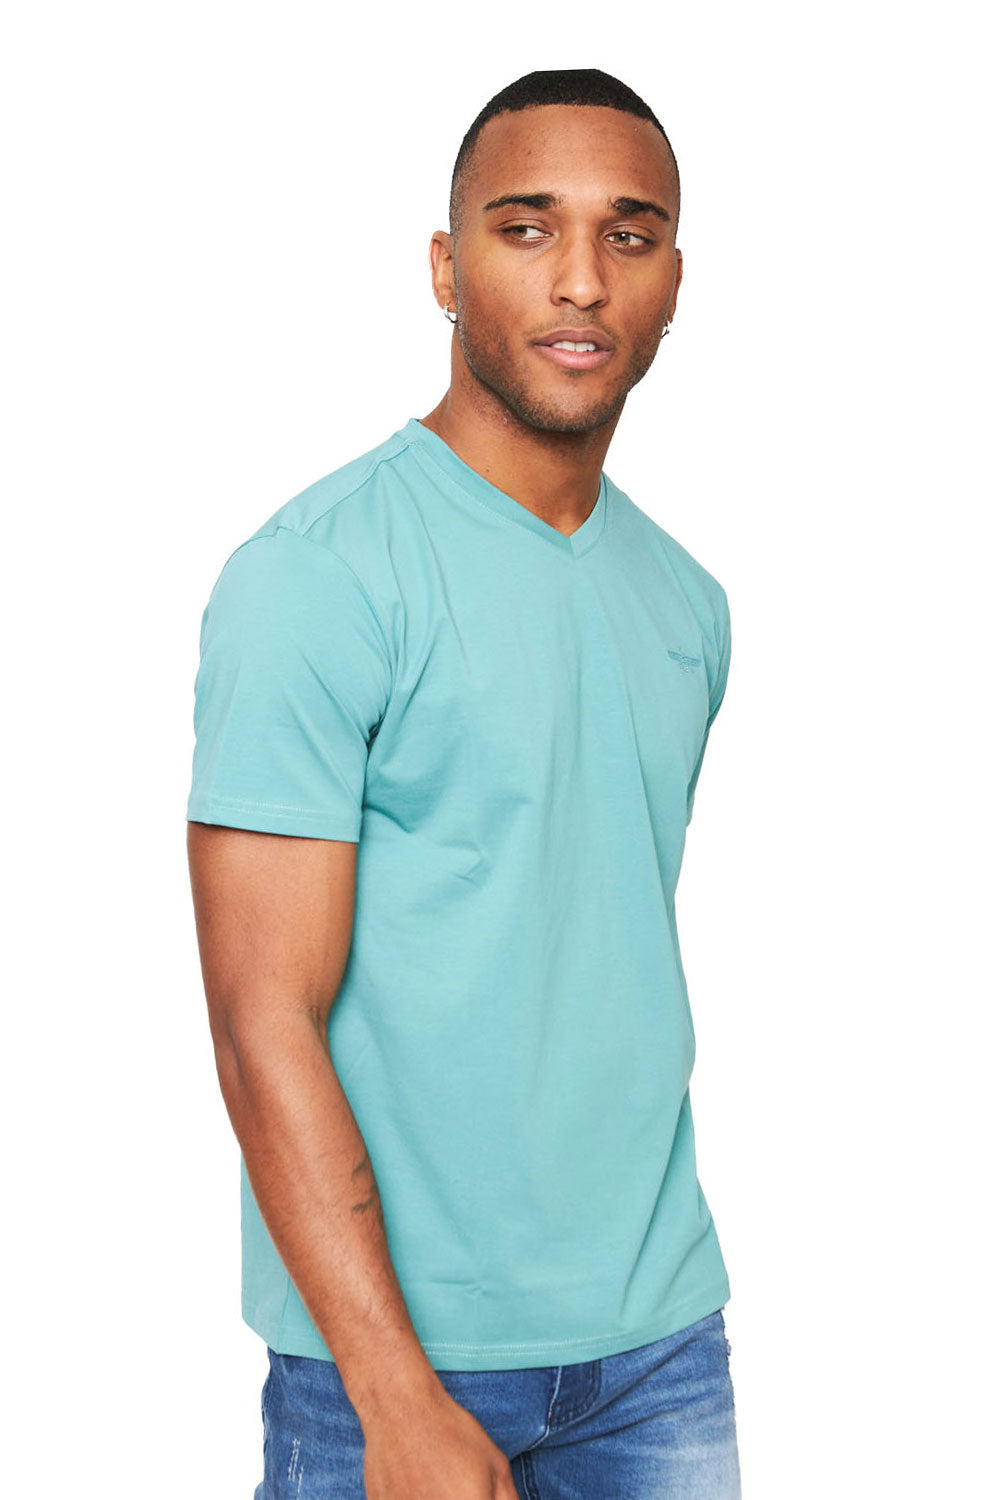 Breaking the Stereotype: How Men Can Wear Printed V-Neck T-Shirts Confidently